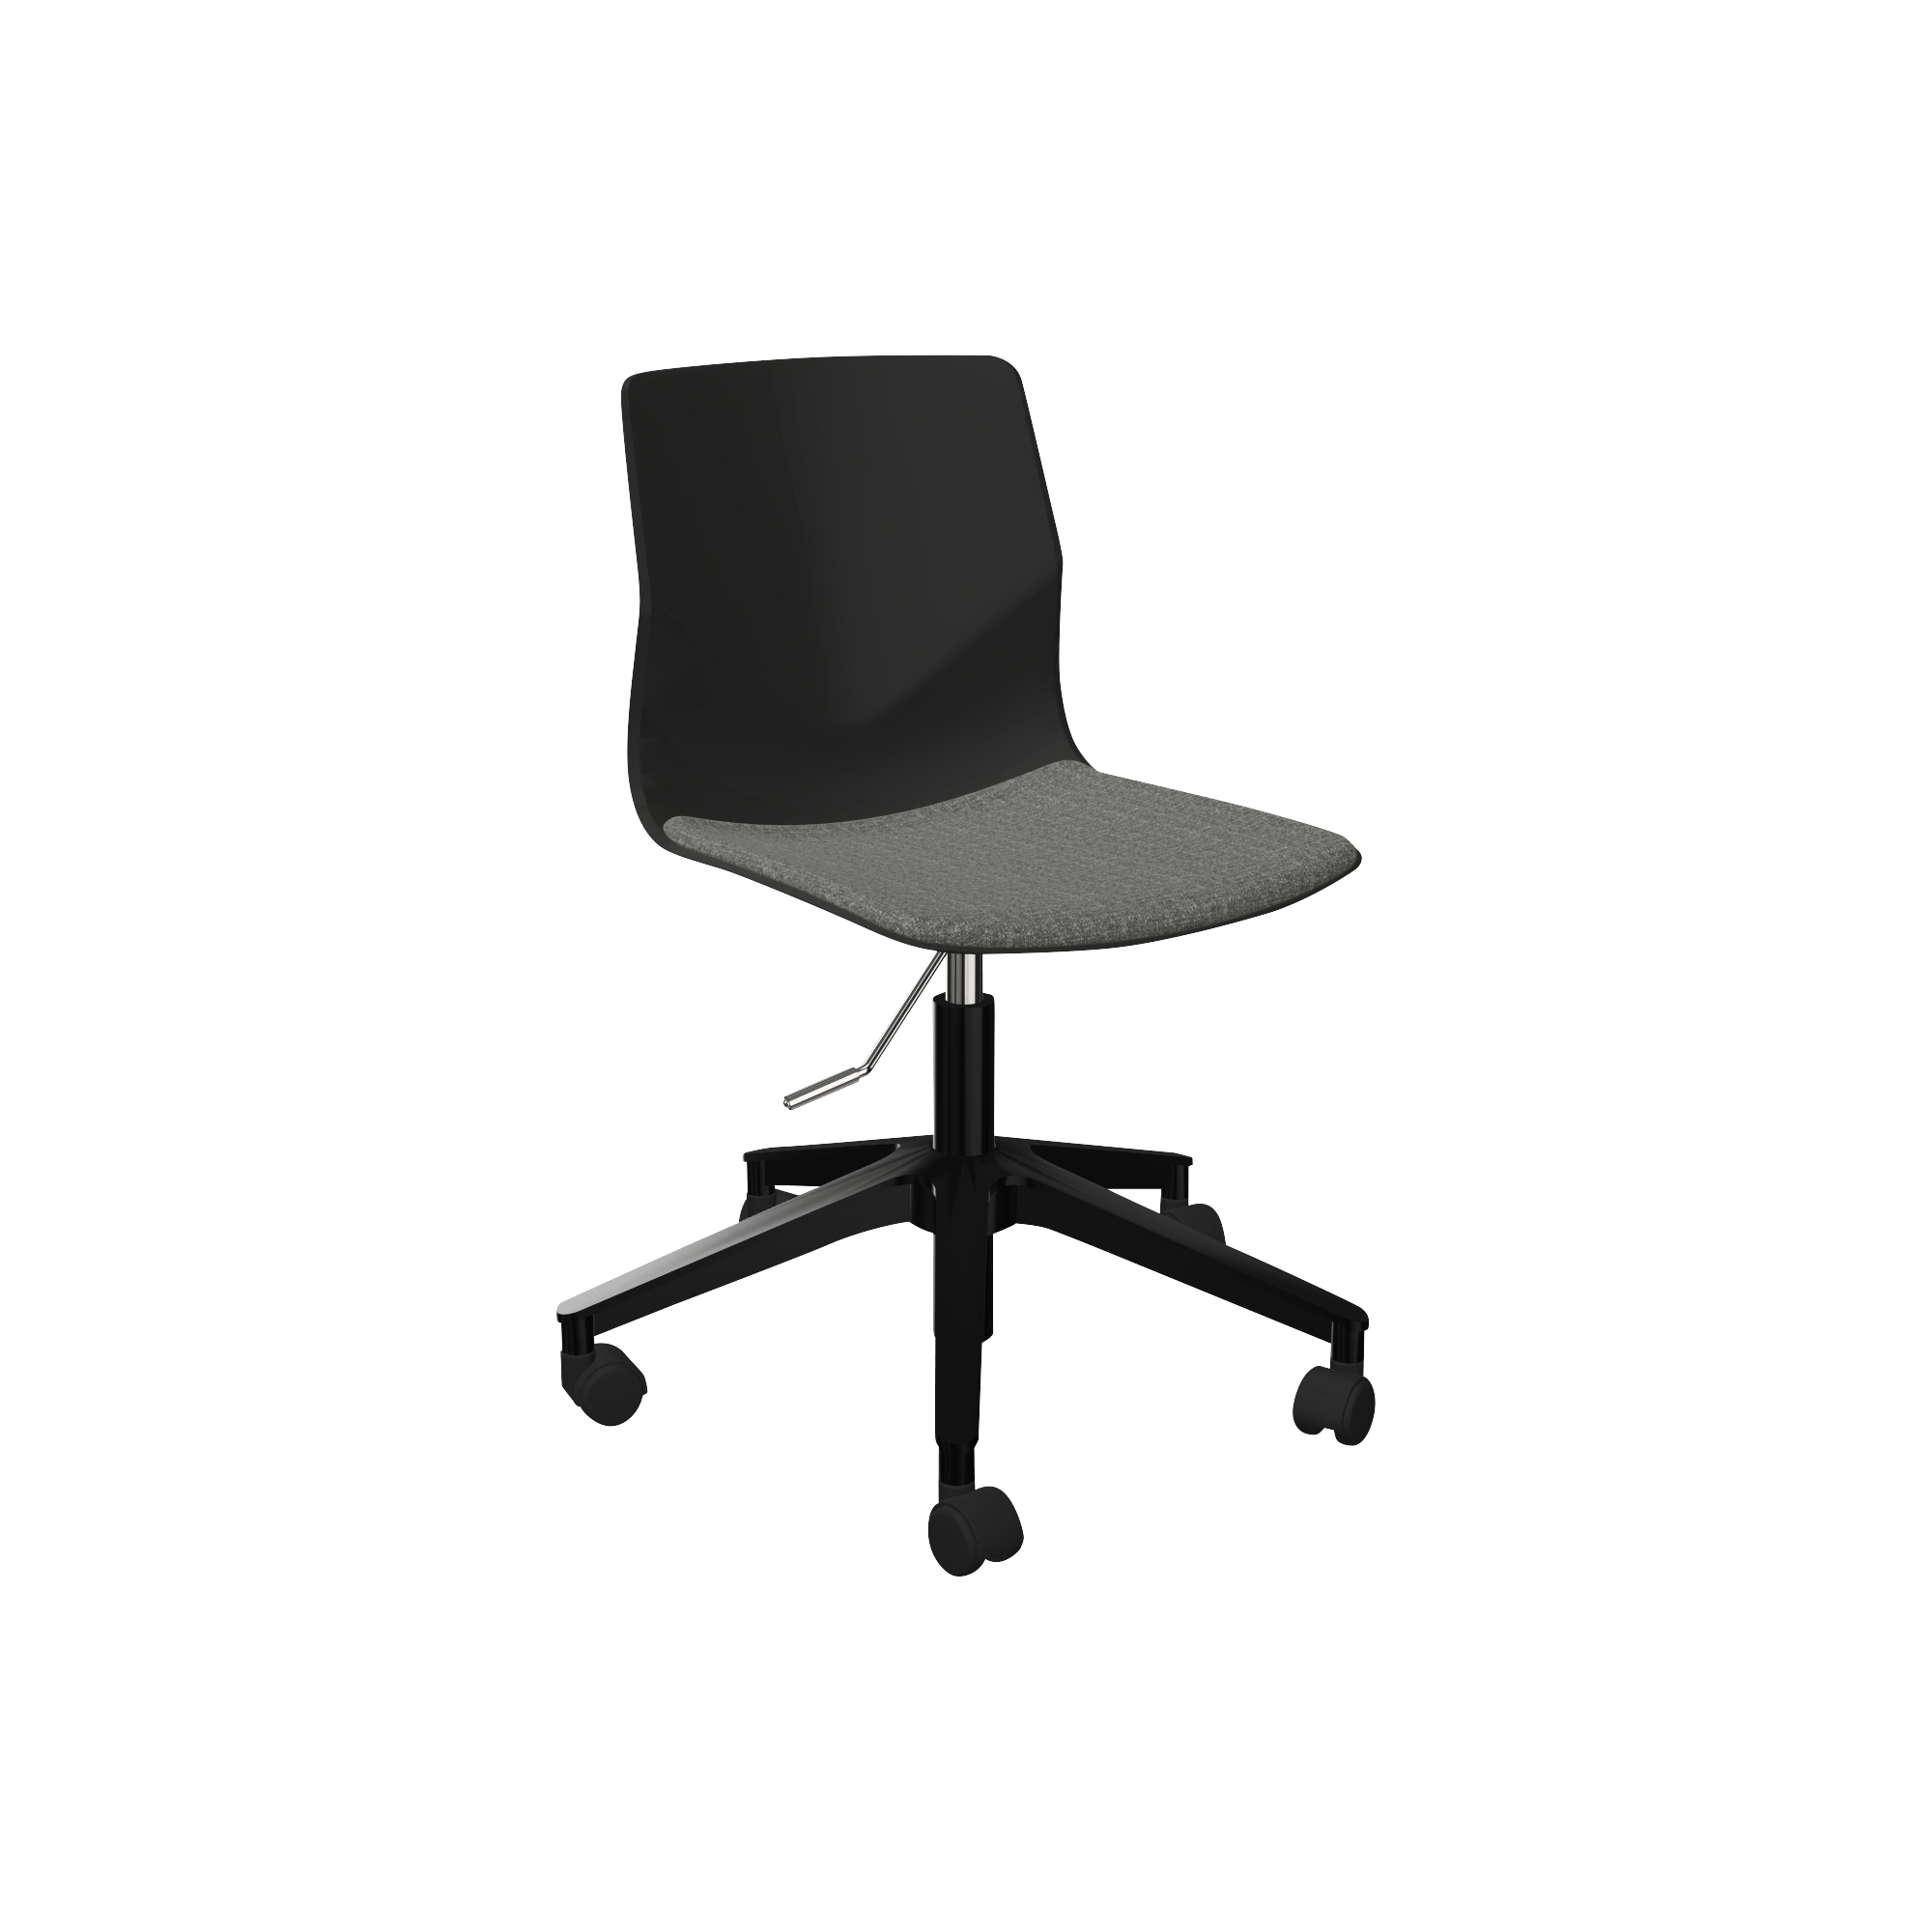 Black and grey adjustable height office chair with wheels